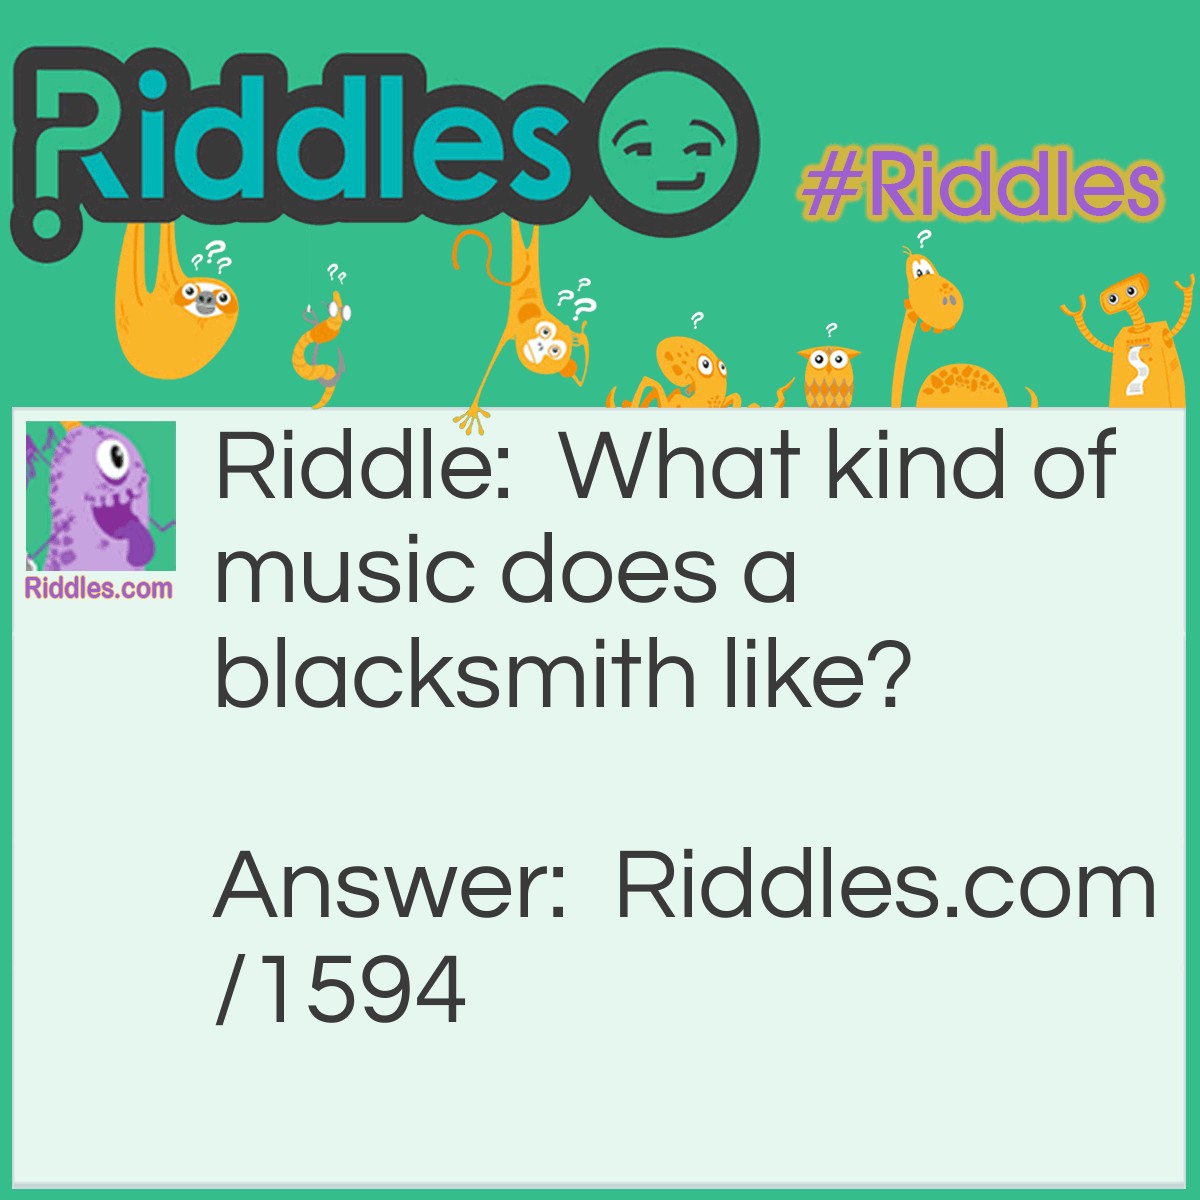 Riddle: What kind of music does a blacksmith like? Answer: Heavy metal!